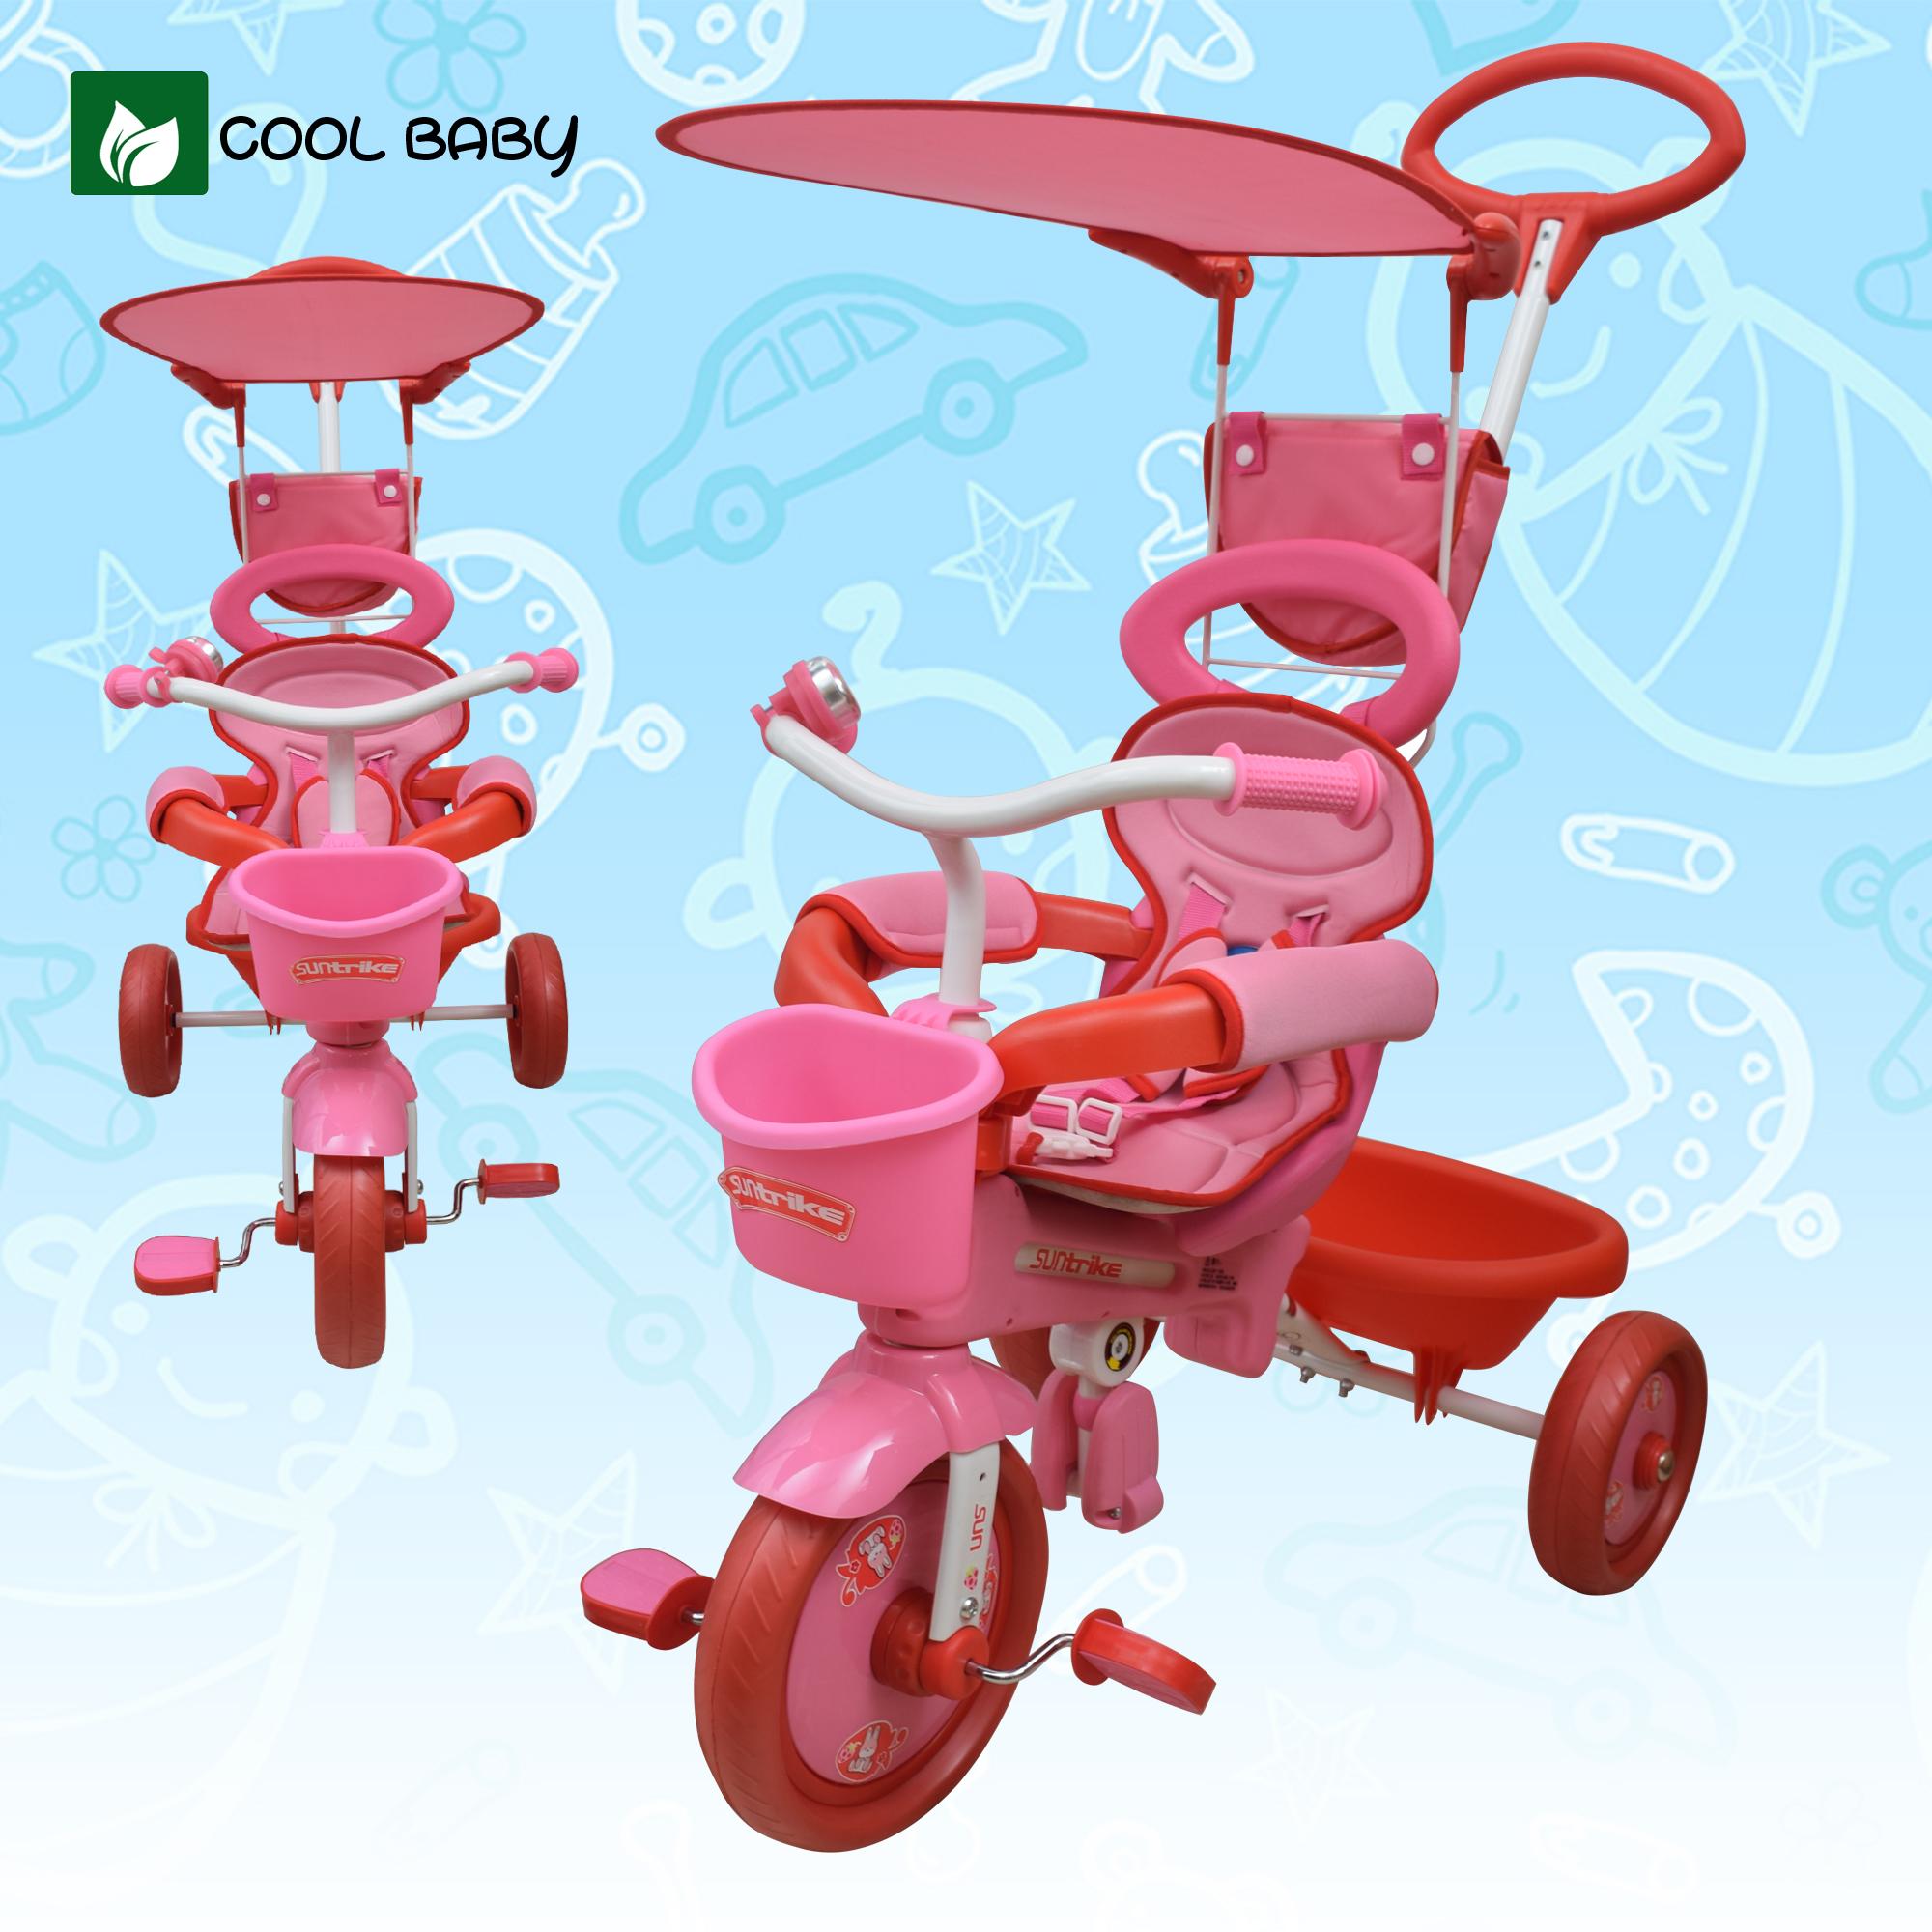 dual seat adult tricycle